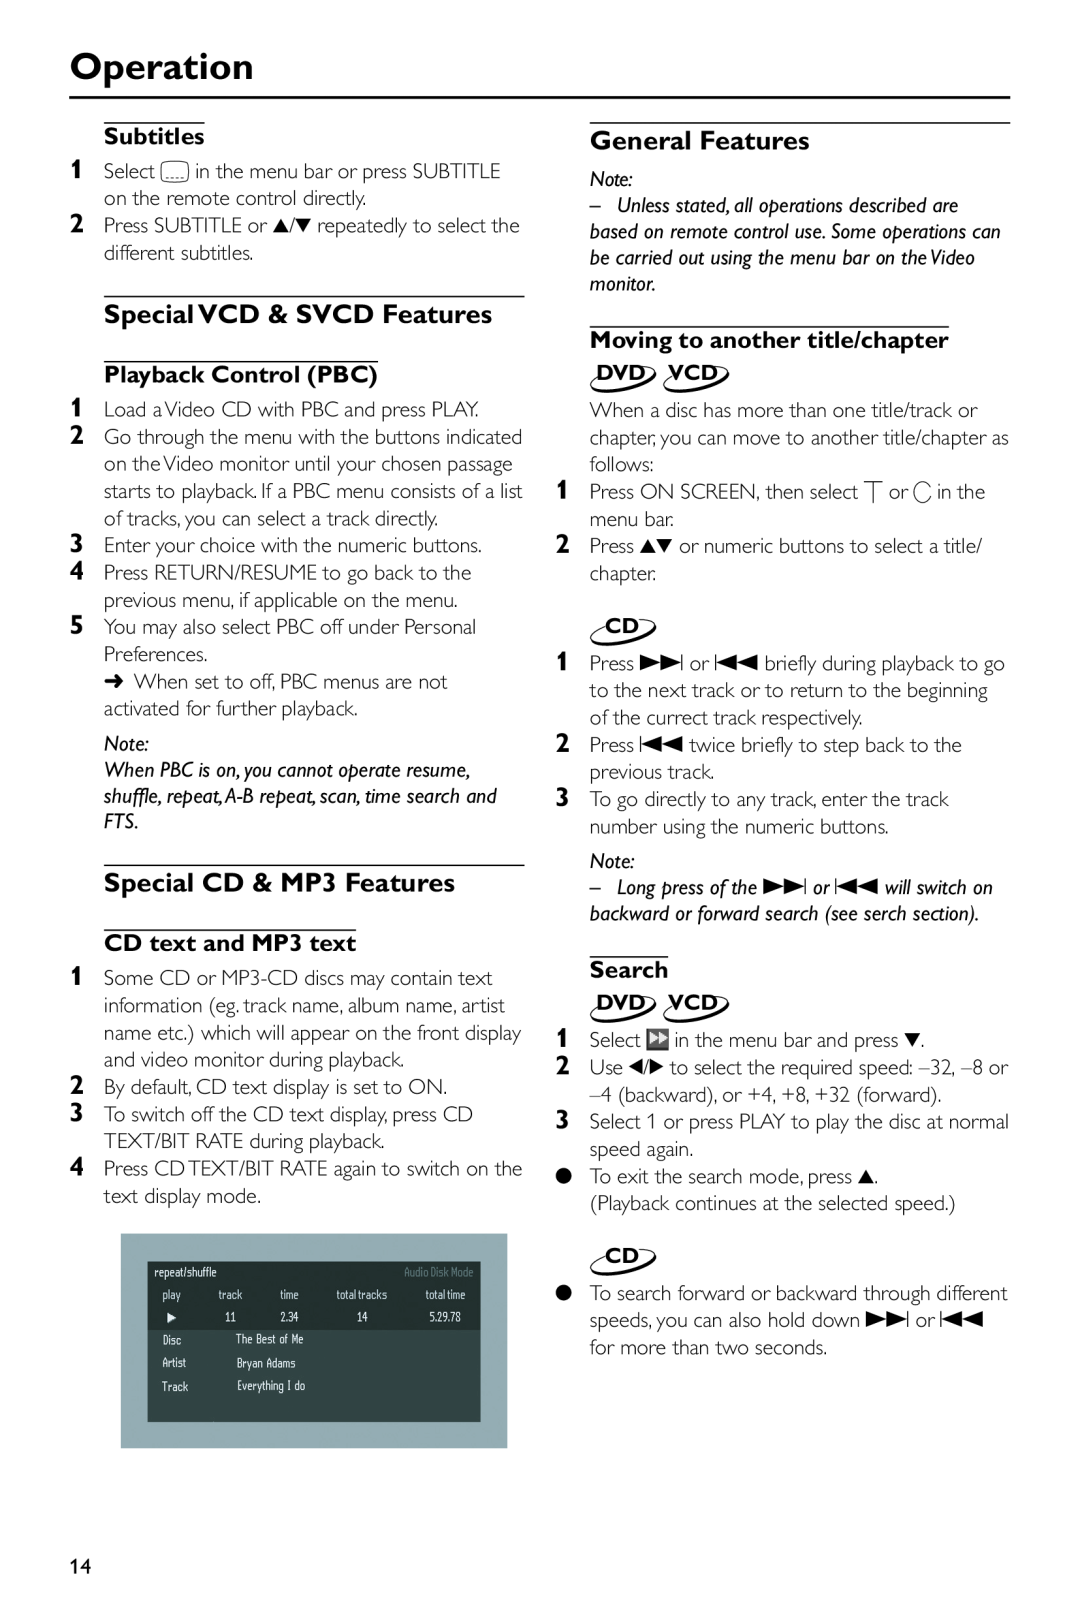 Yamaha DV-S5550 Special VCD & SVCD Features, Special CD & MP3 Features, General Features, Subtitles, Playback Control PBC 